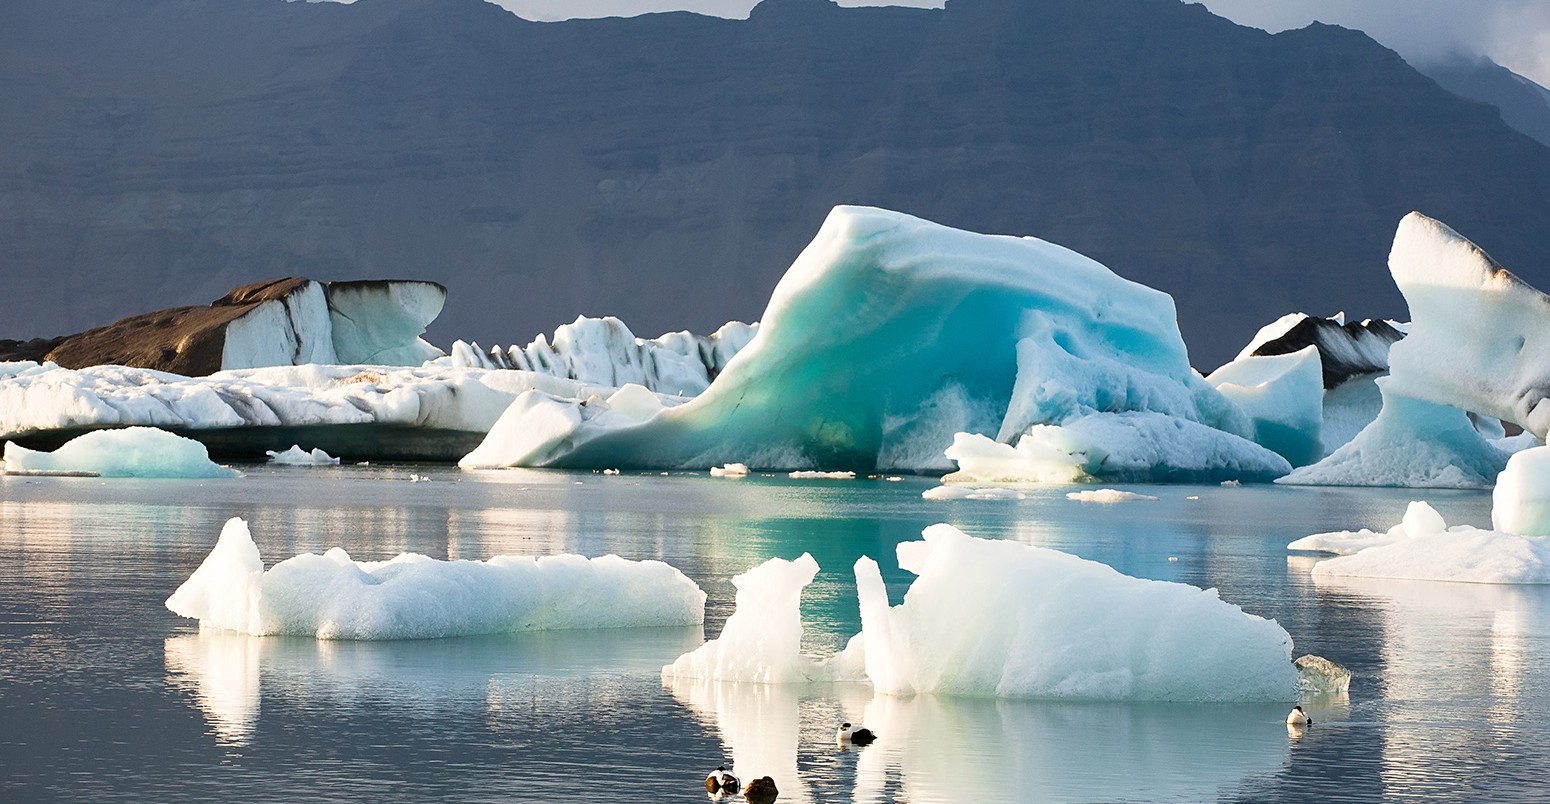 Melting icebergs in the Arctic